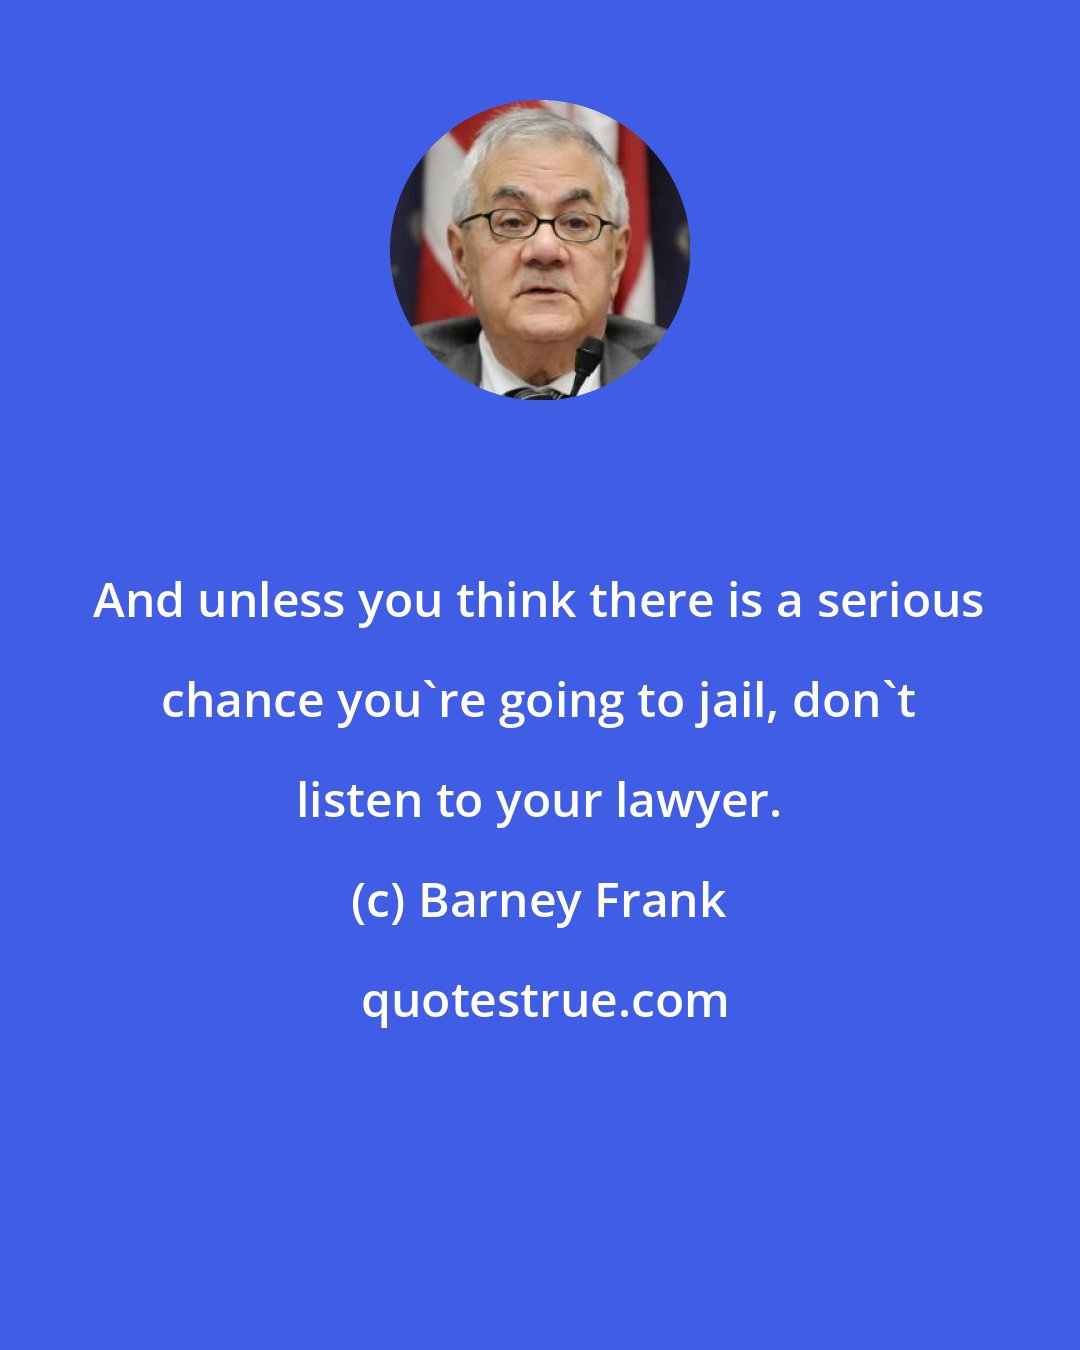 Barney Frank: And unless you think there is a serious chance you're going to jail, don't listen to your lawyer.